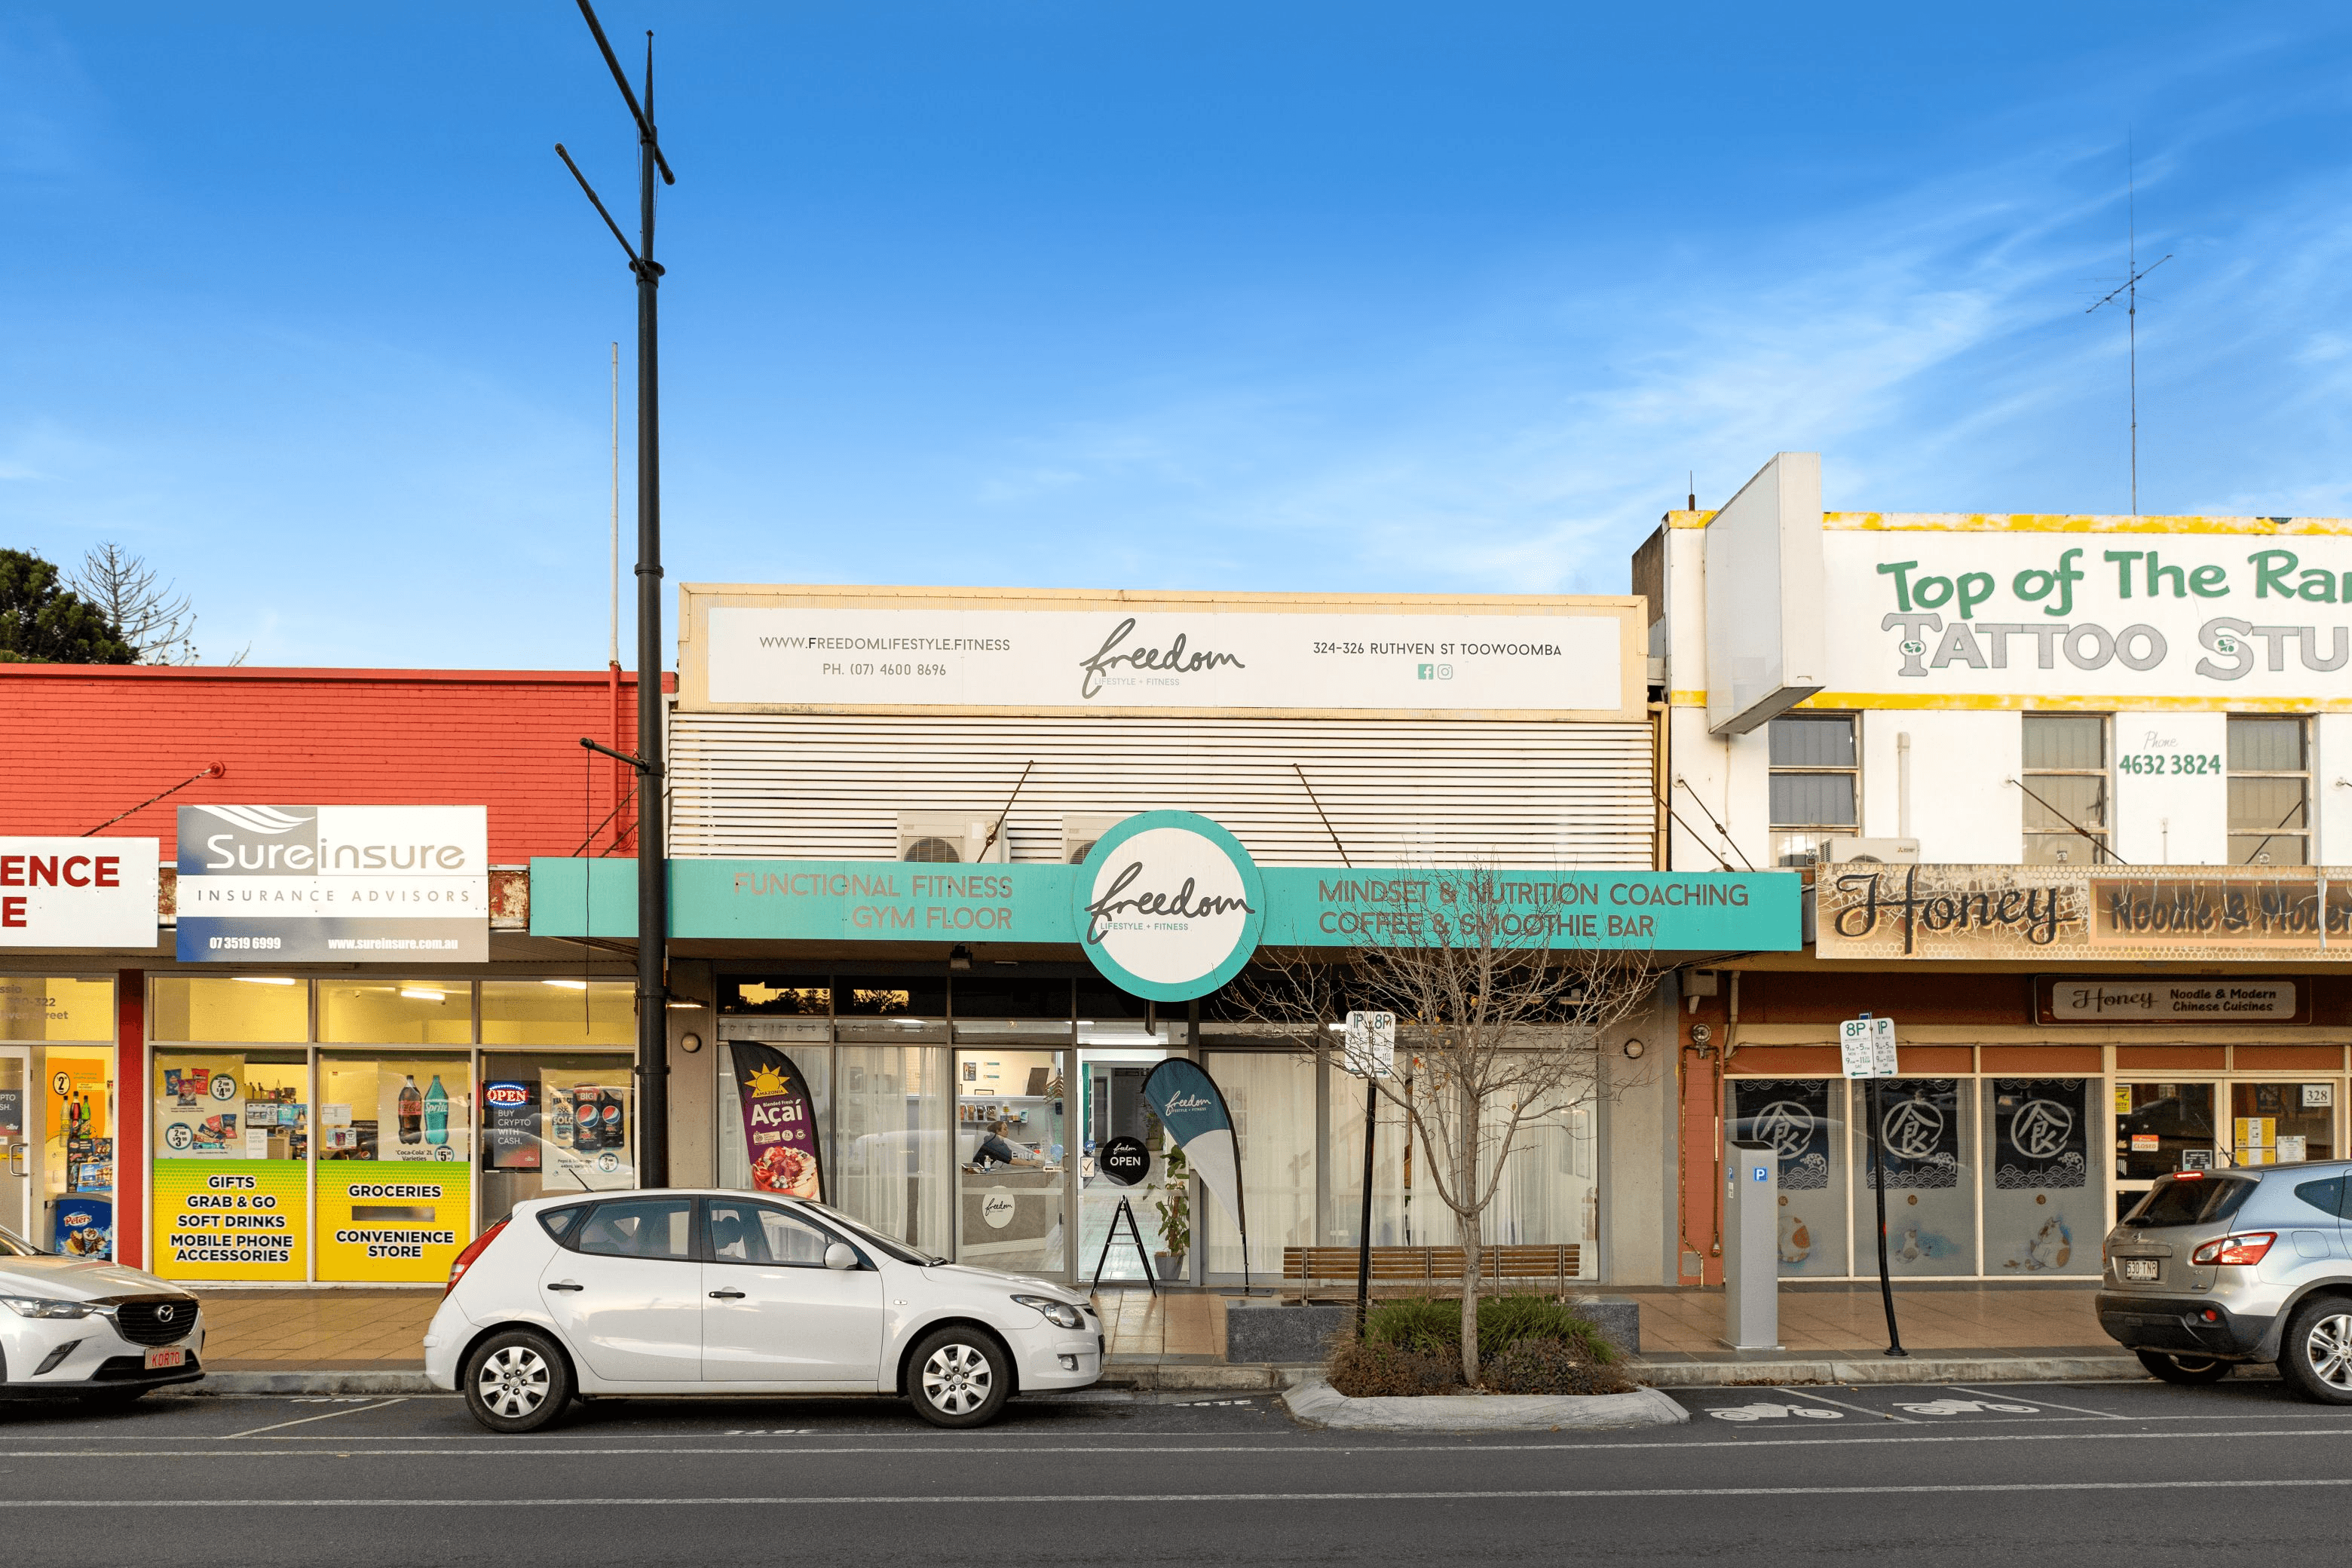 Offices/324-326 Ruthven Street, TOOWOOMBA CITY, QLD 4350